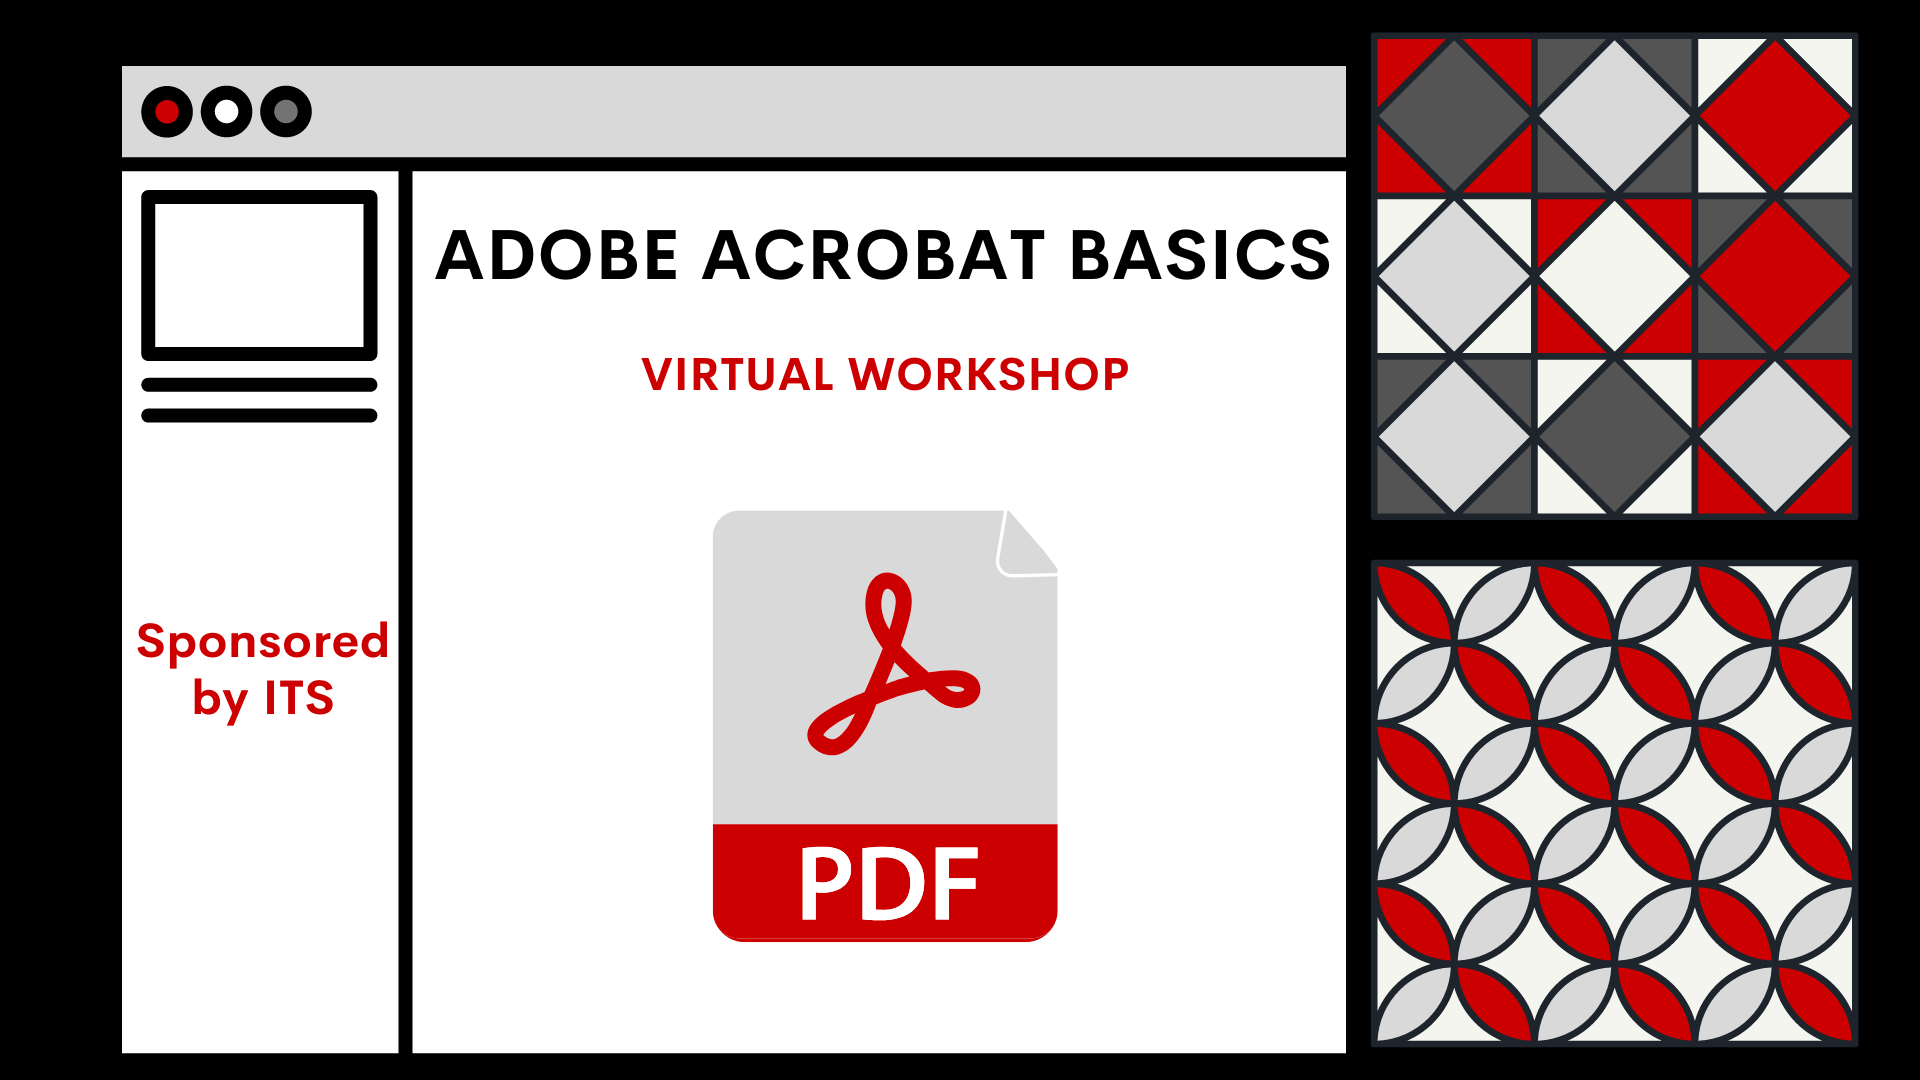 Geometric patterns of gray, red, white, and black. PDF Icon in the middle. Text reads Adobe Acrobat Basics, Virtual Workshop, Sponsored by ITS